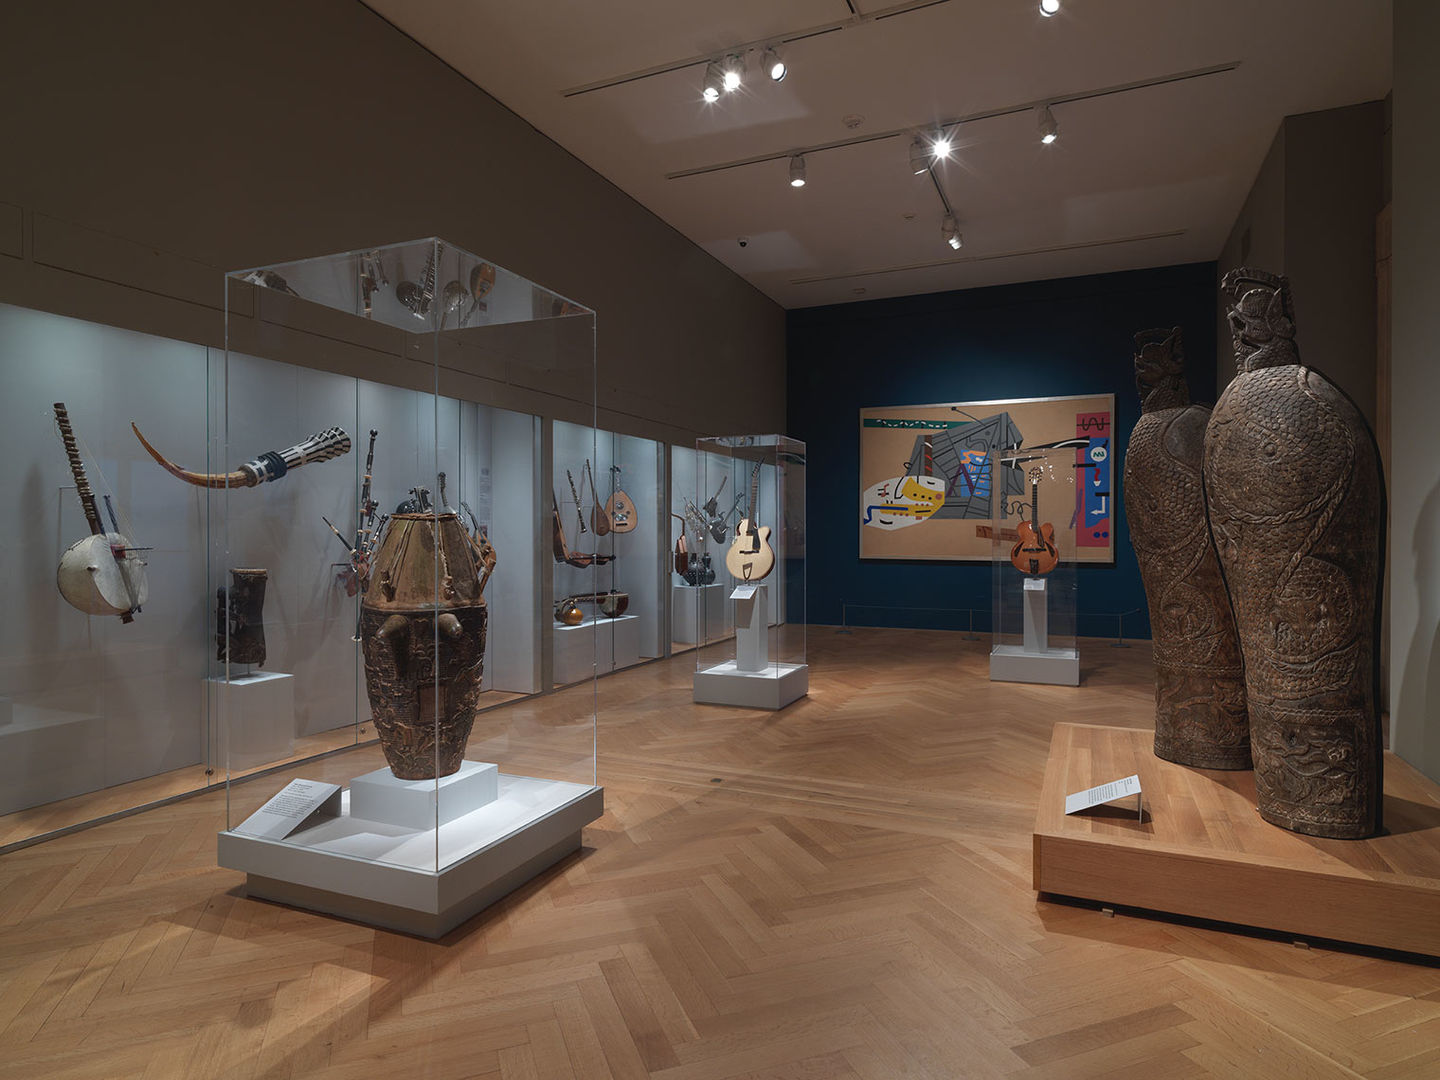 The Met's Art of Music through Time presentation in gallery 684